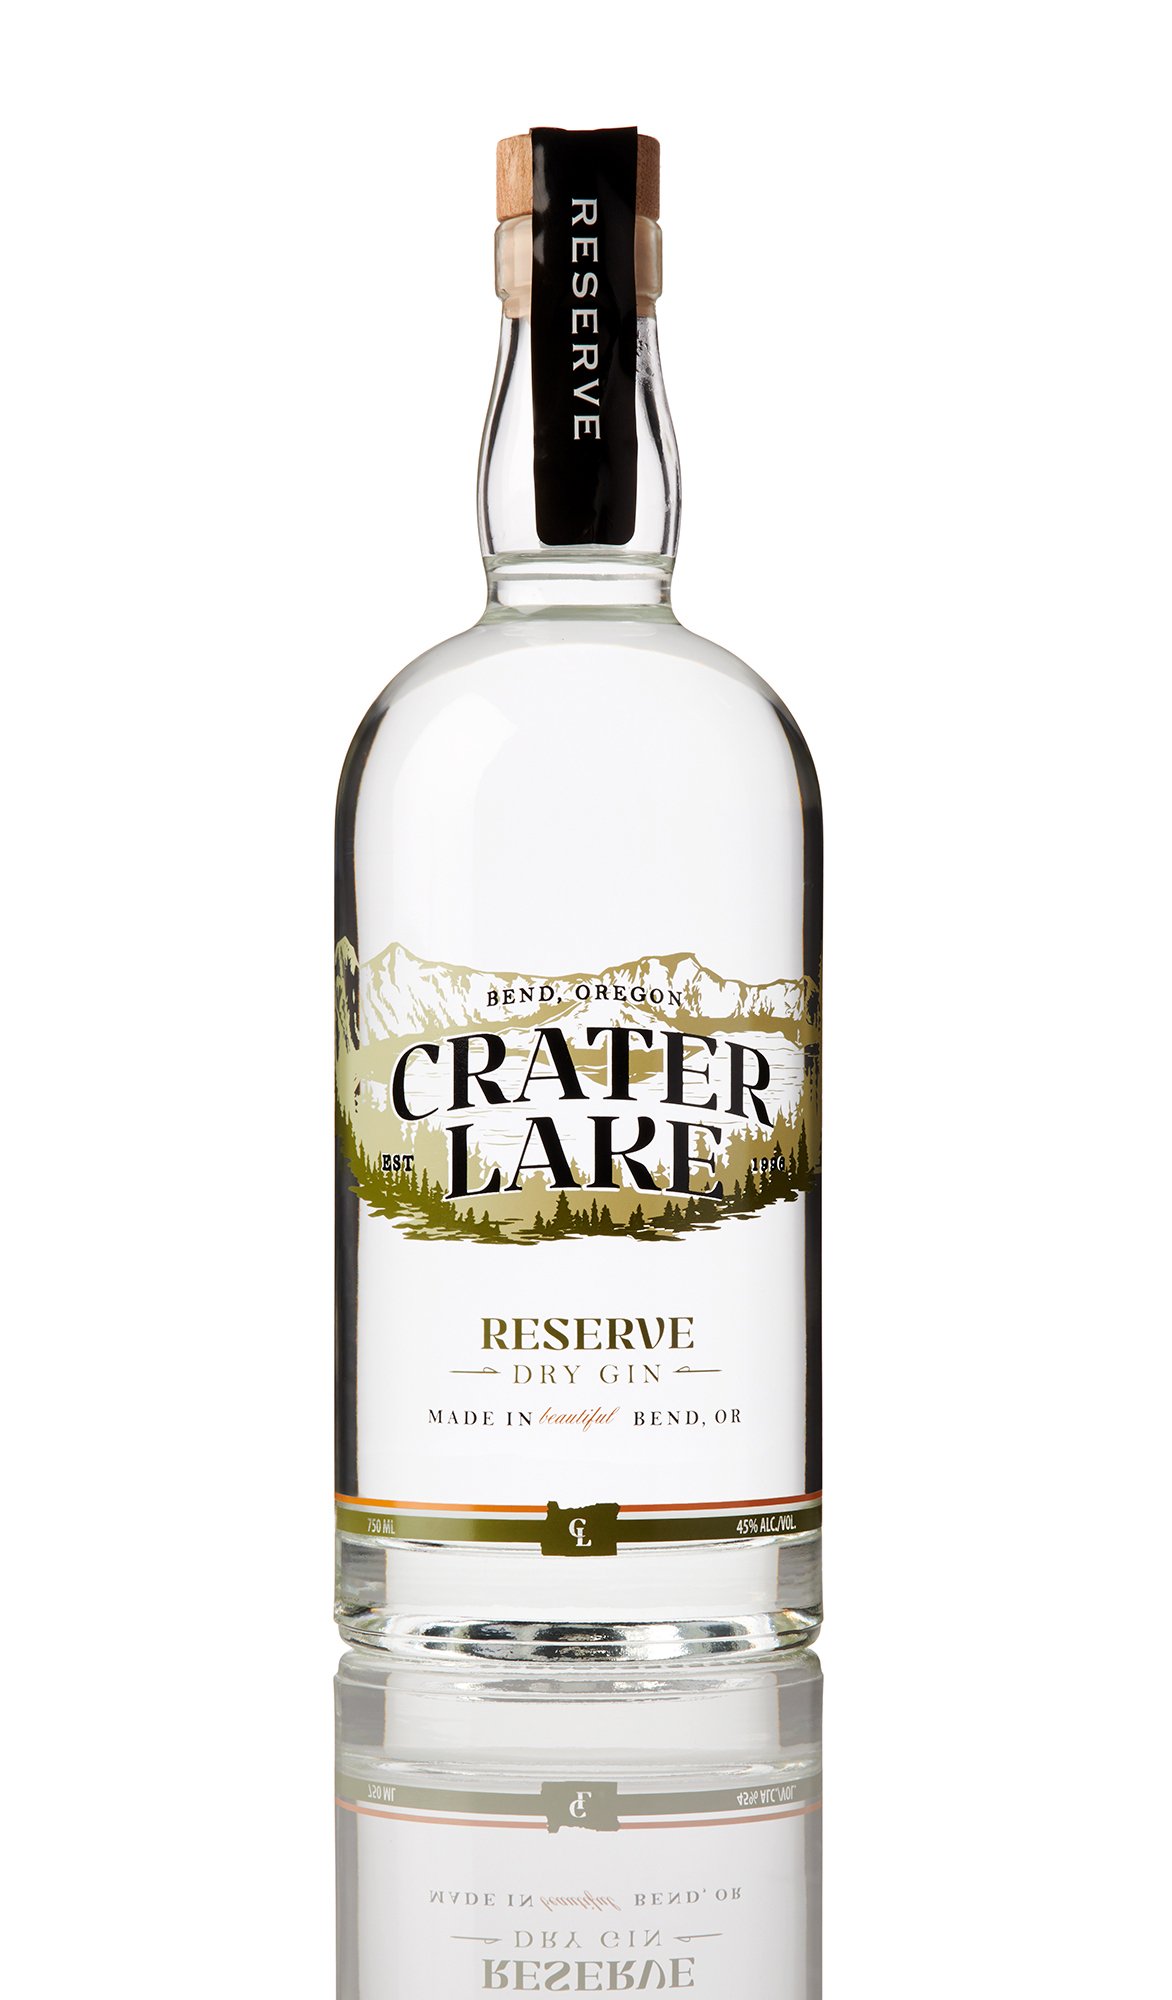 Bendistillery Releases Crater Lake Reserve Dry Gin ...